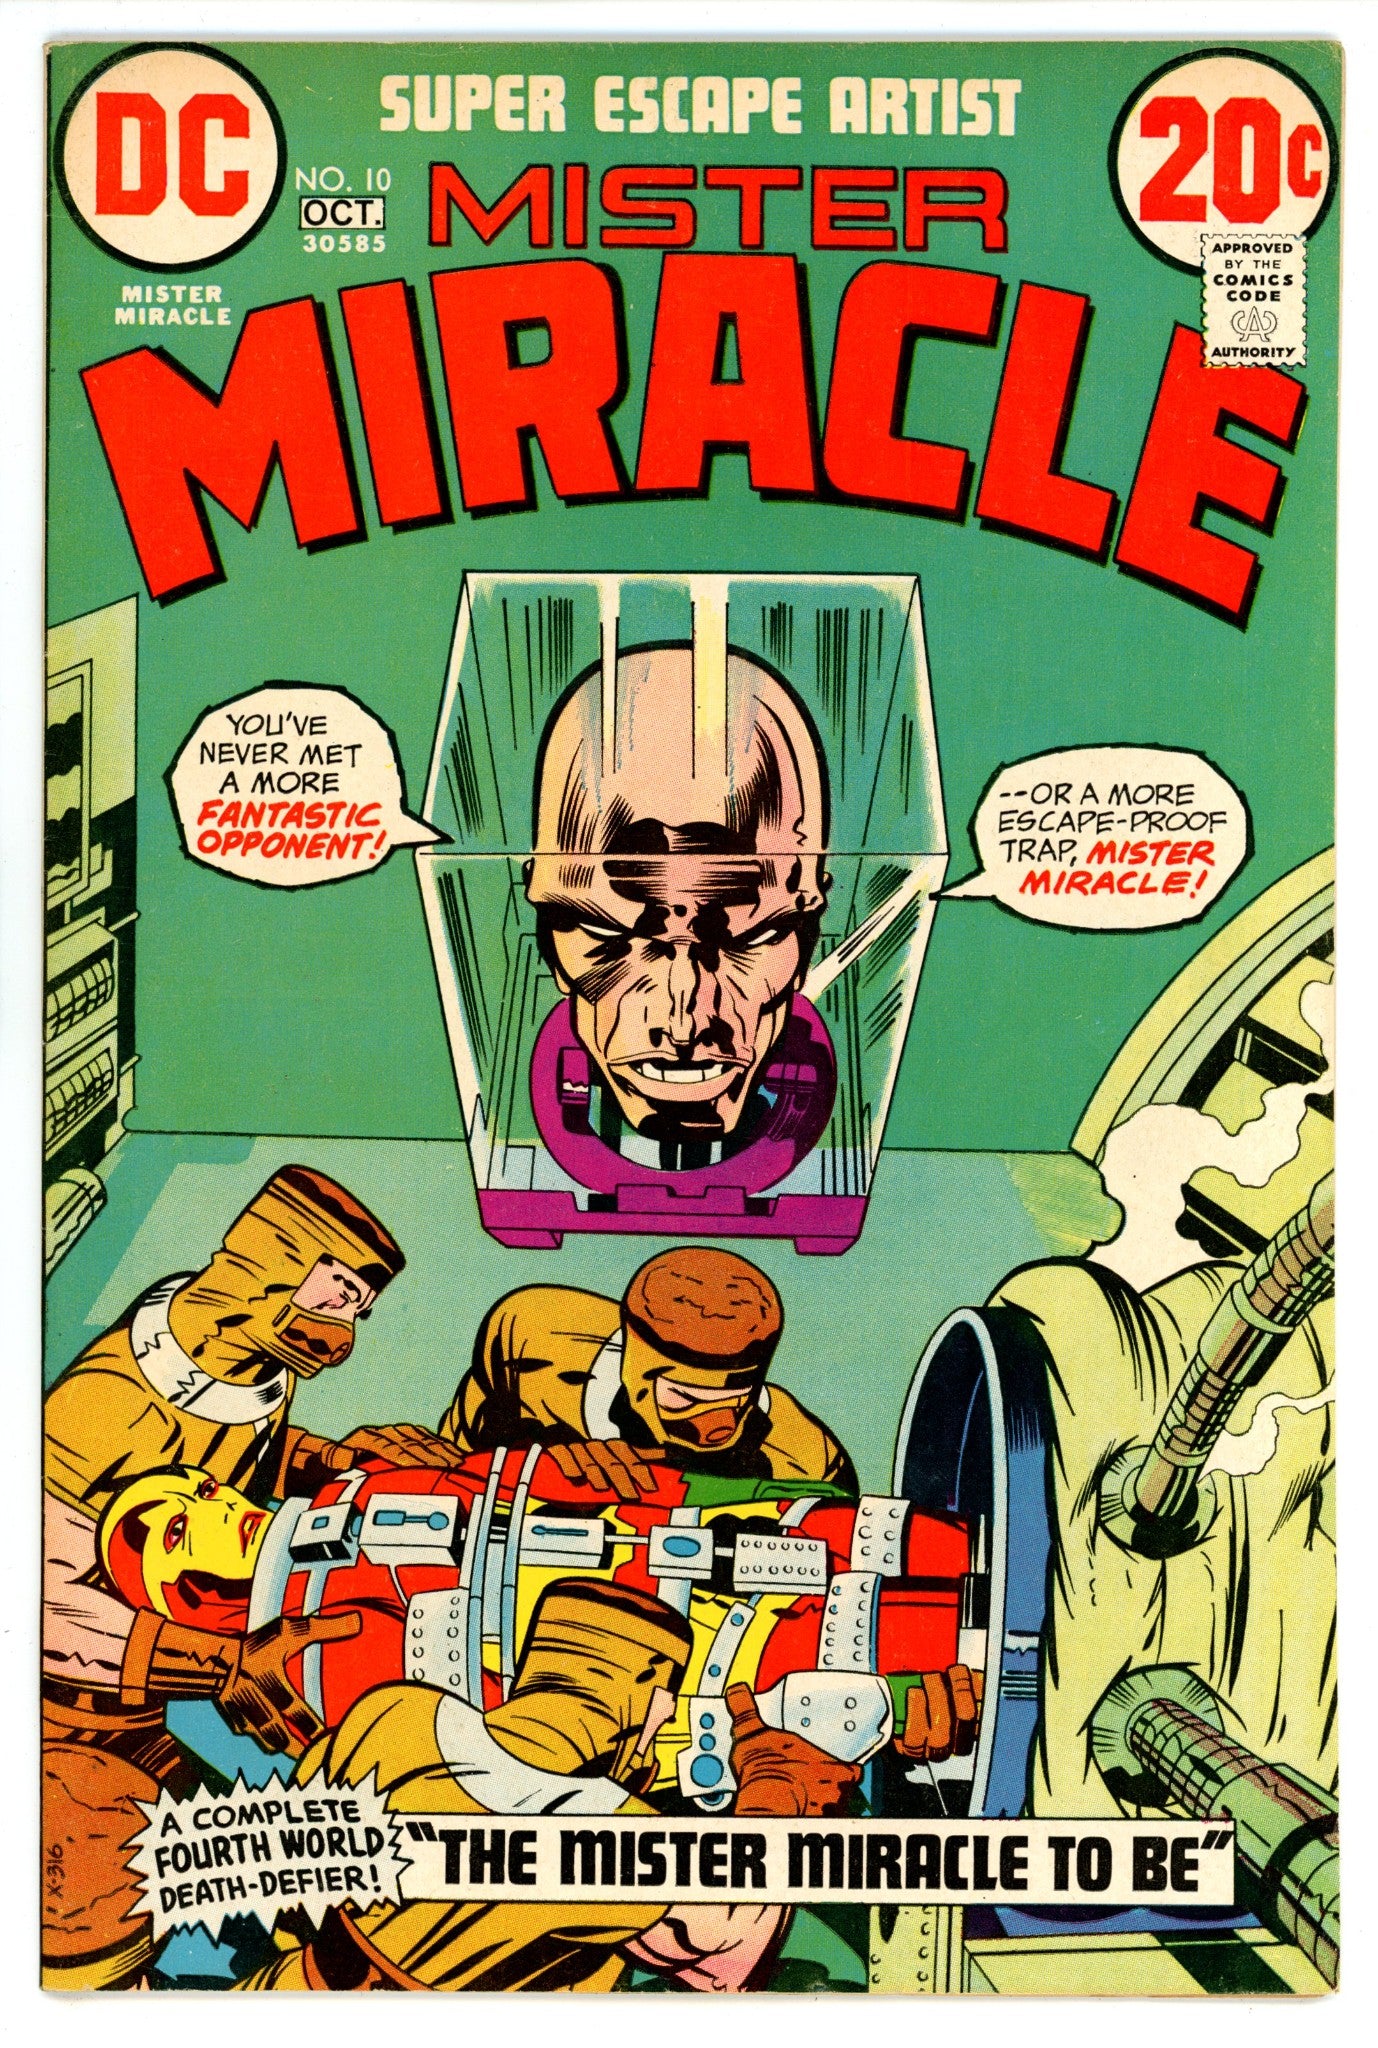 Mister Miracle Vol 1 10 FN+ (6.5) (1972) 